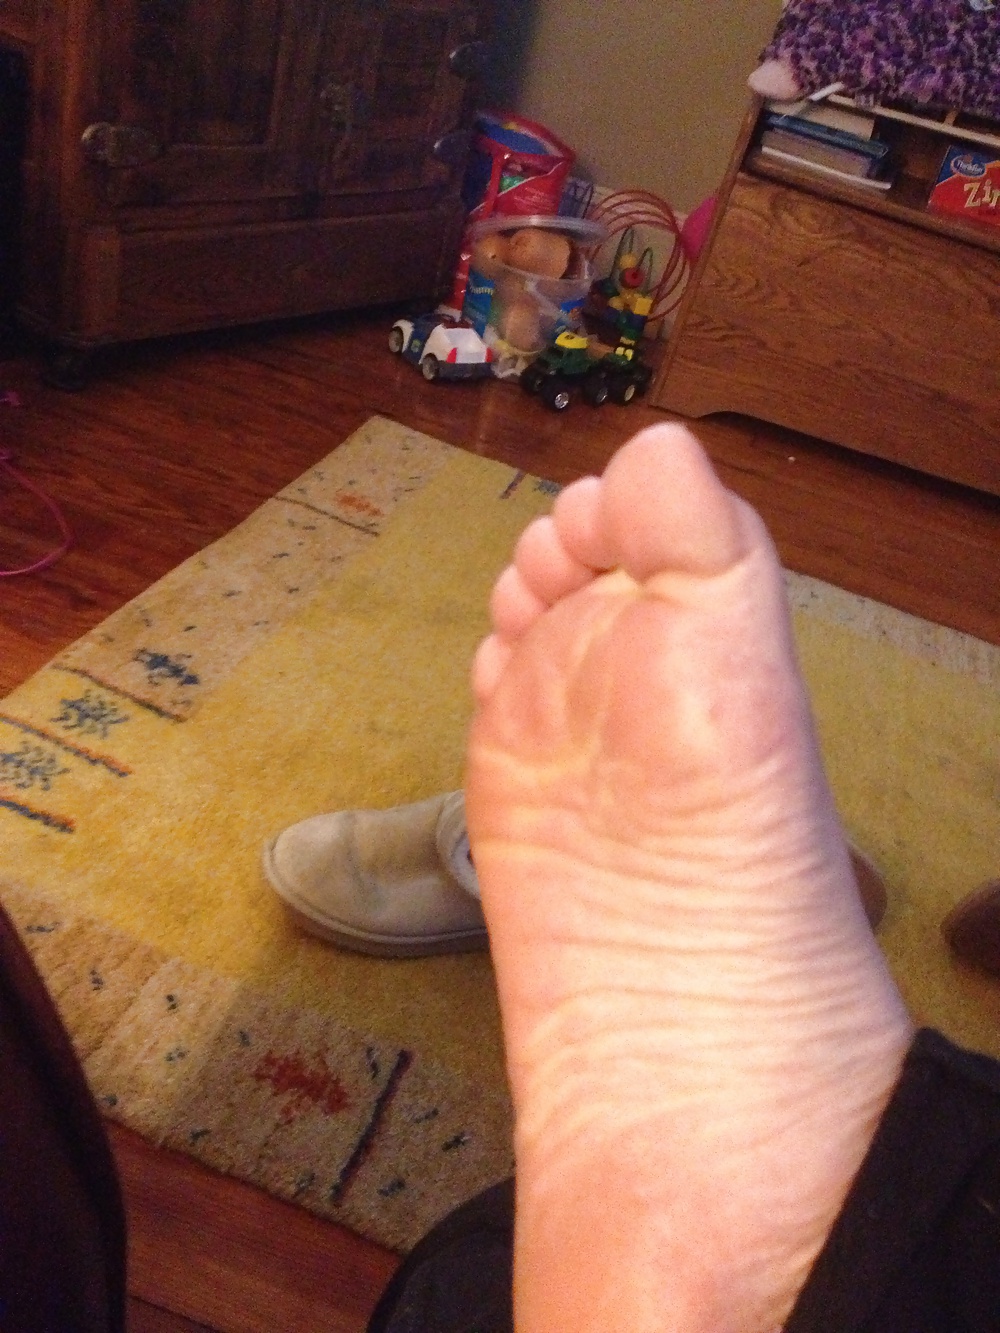 BBW Friend's Amature Wrinkly Soles pict gal